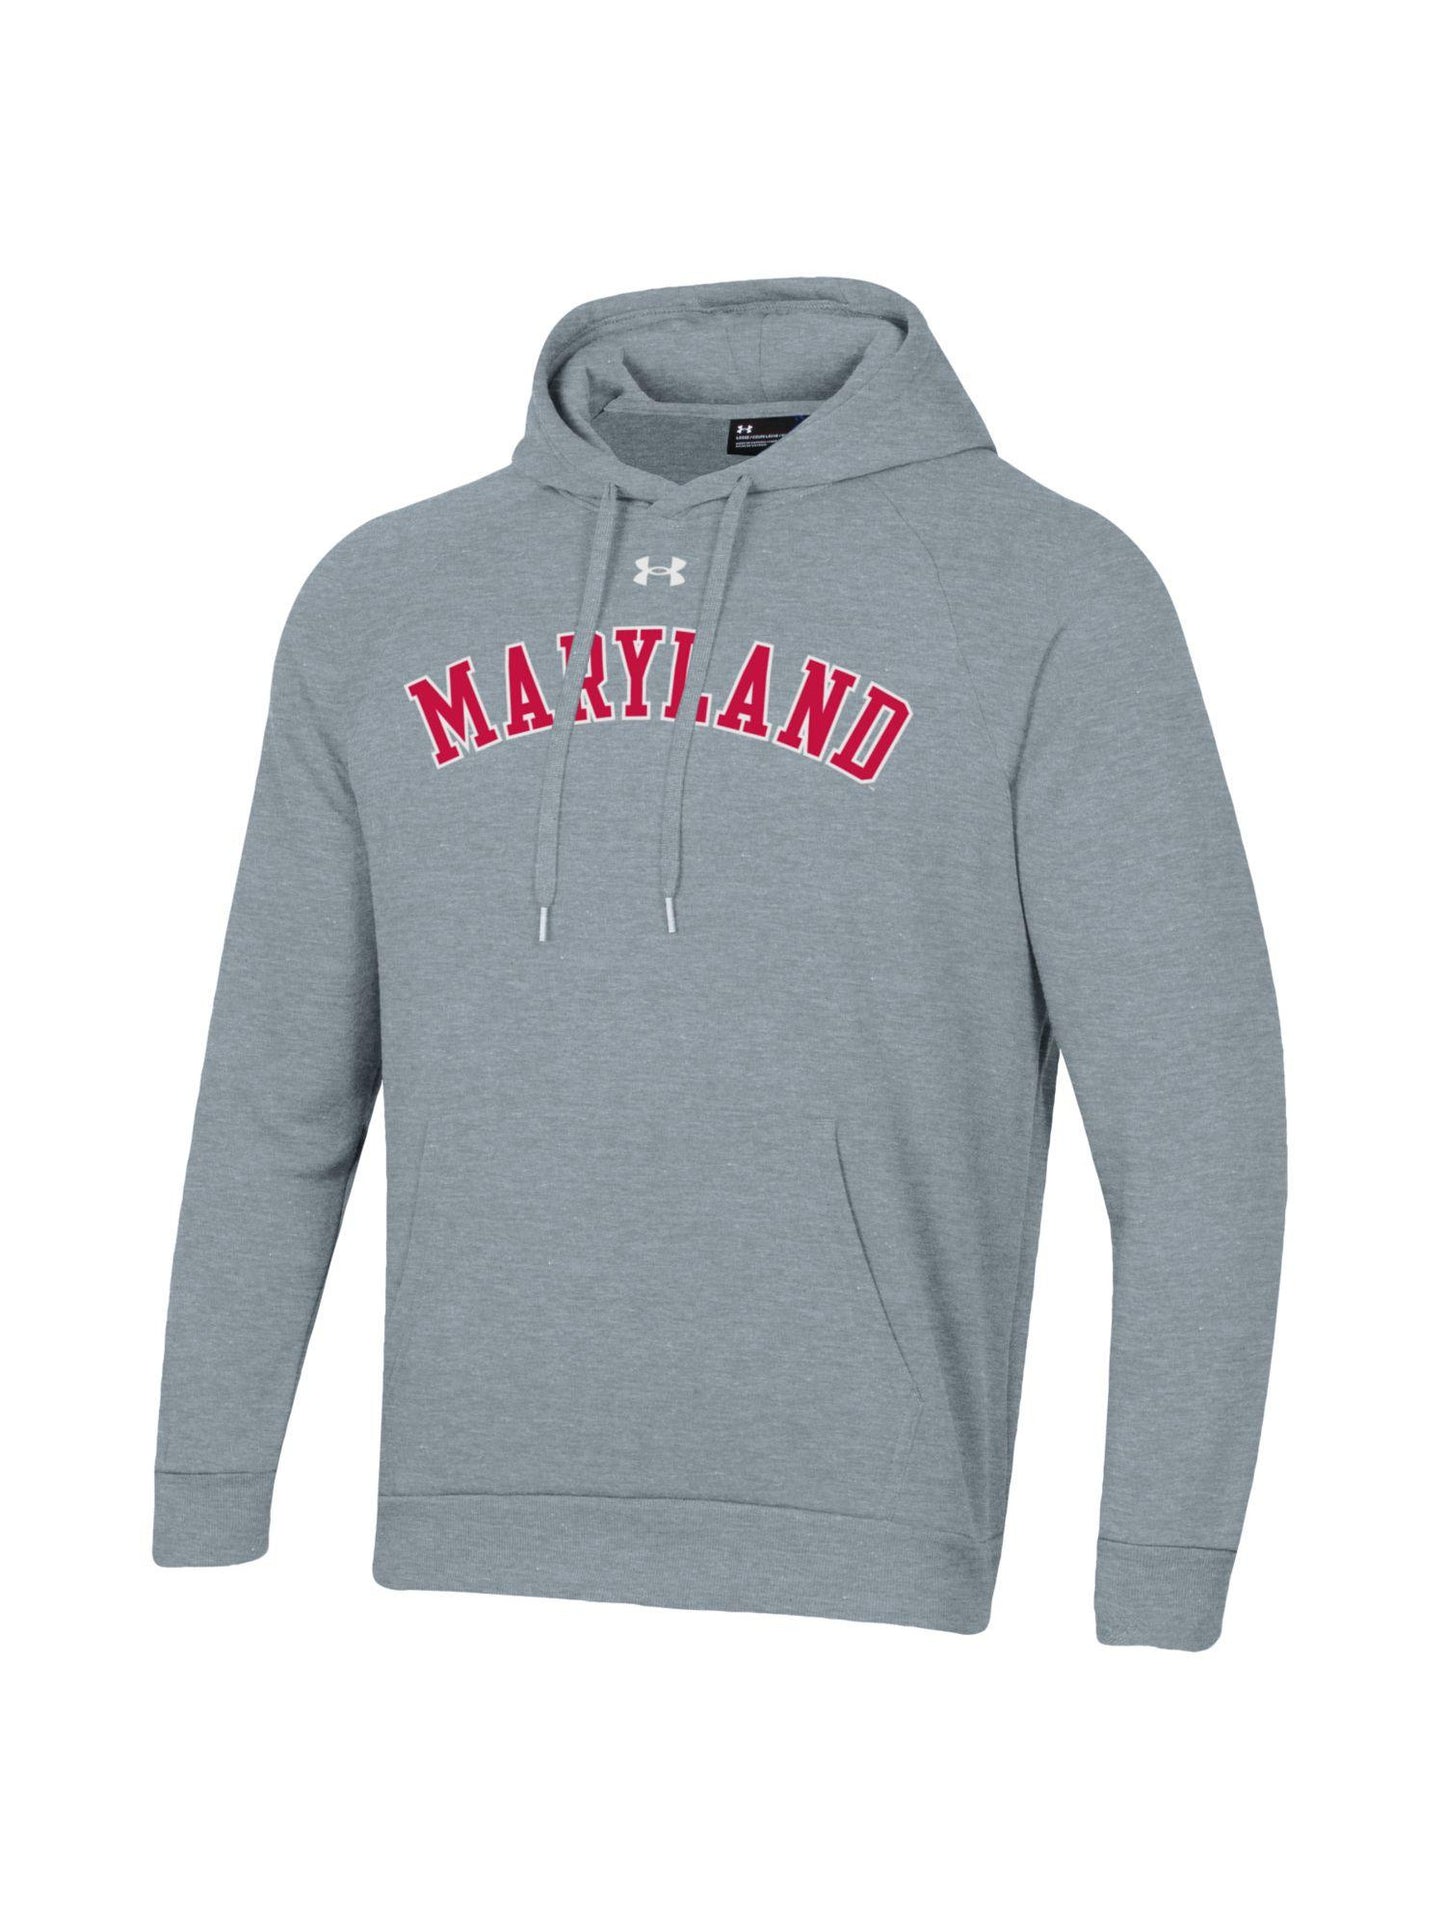 Under Armour Maryland Hoodie